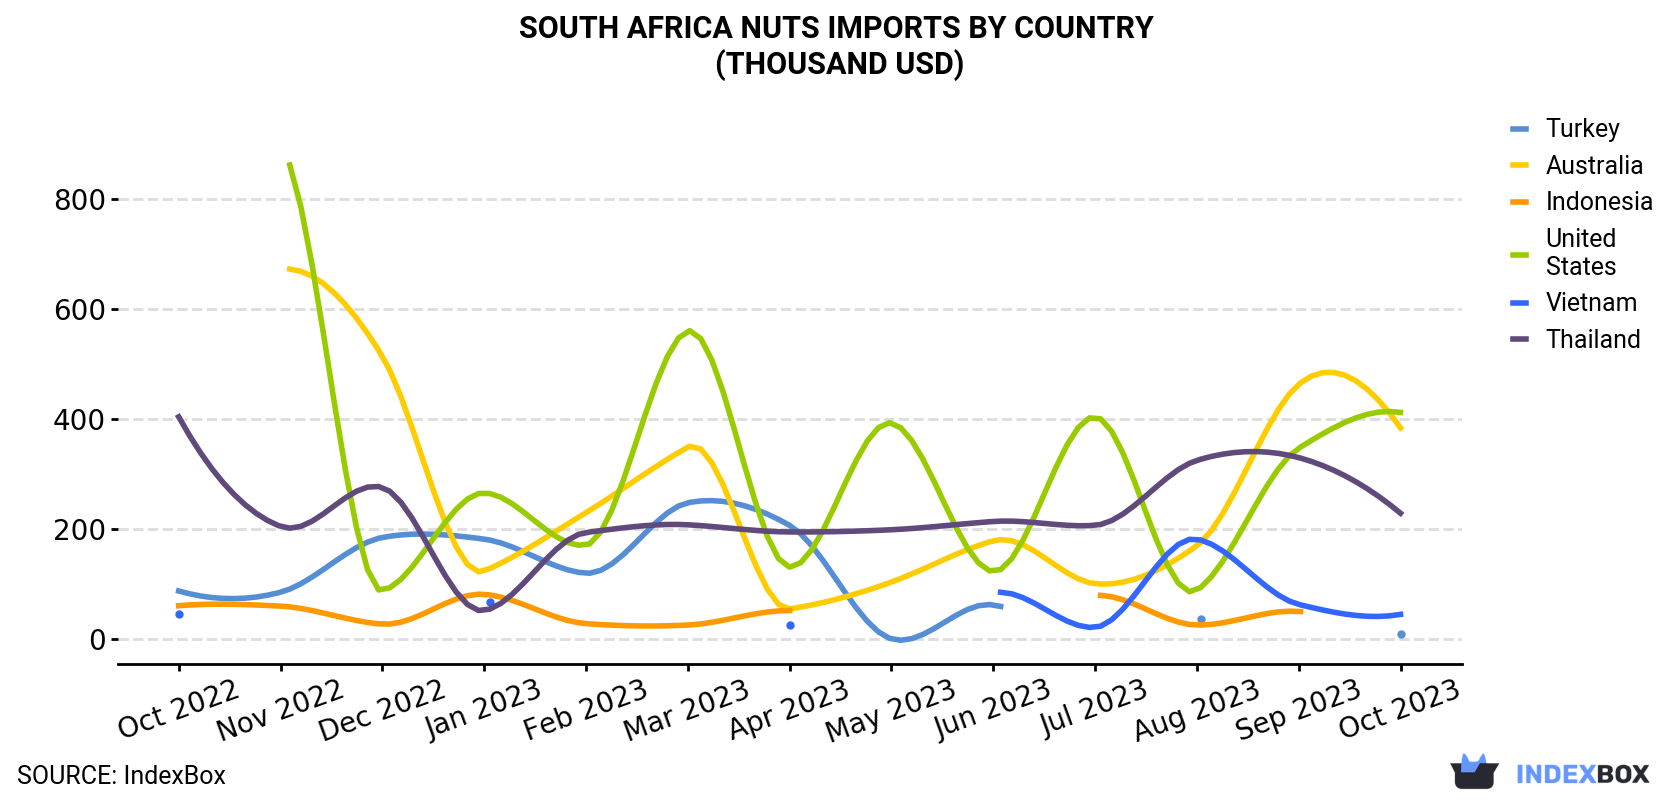 South Africa Nuts Imports By Country (Thousand USD)